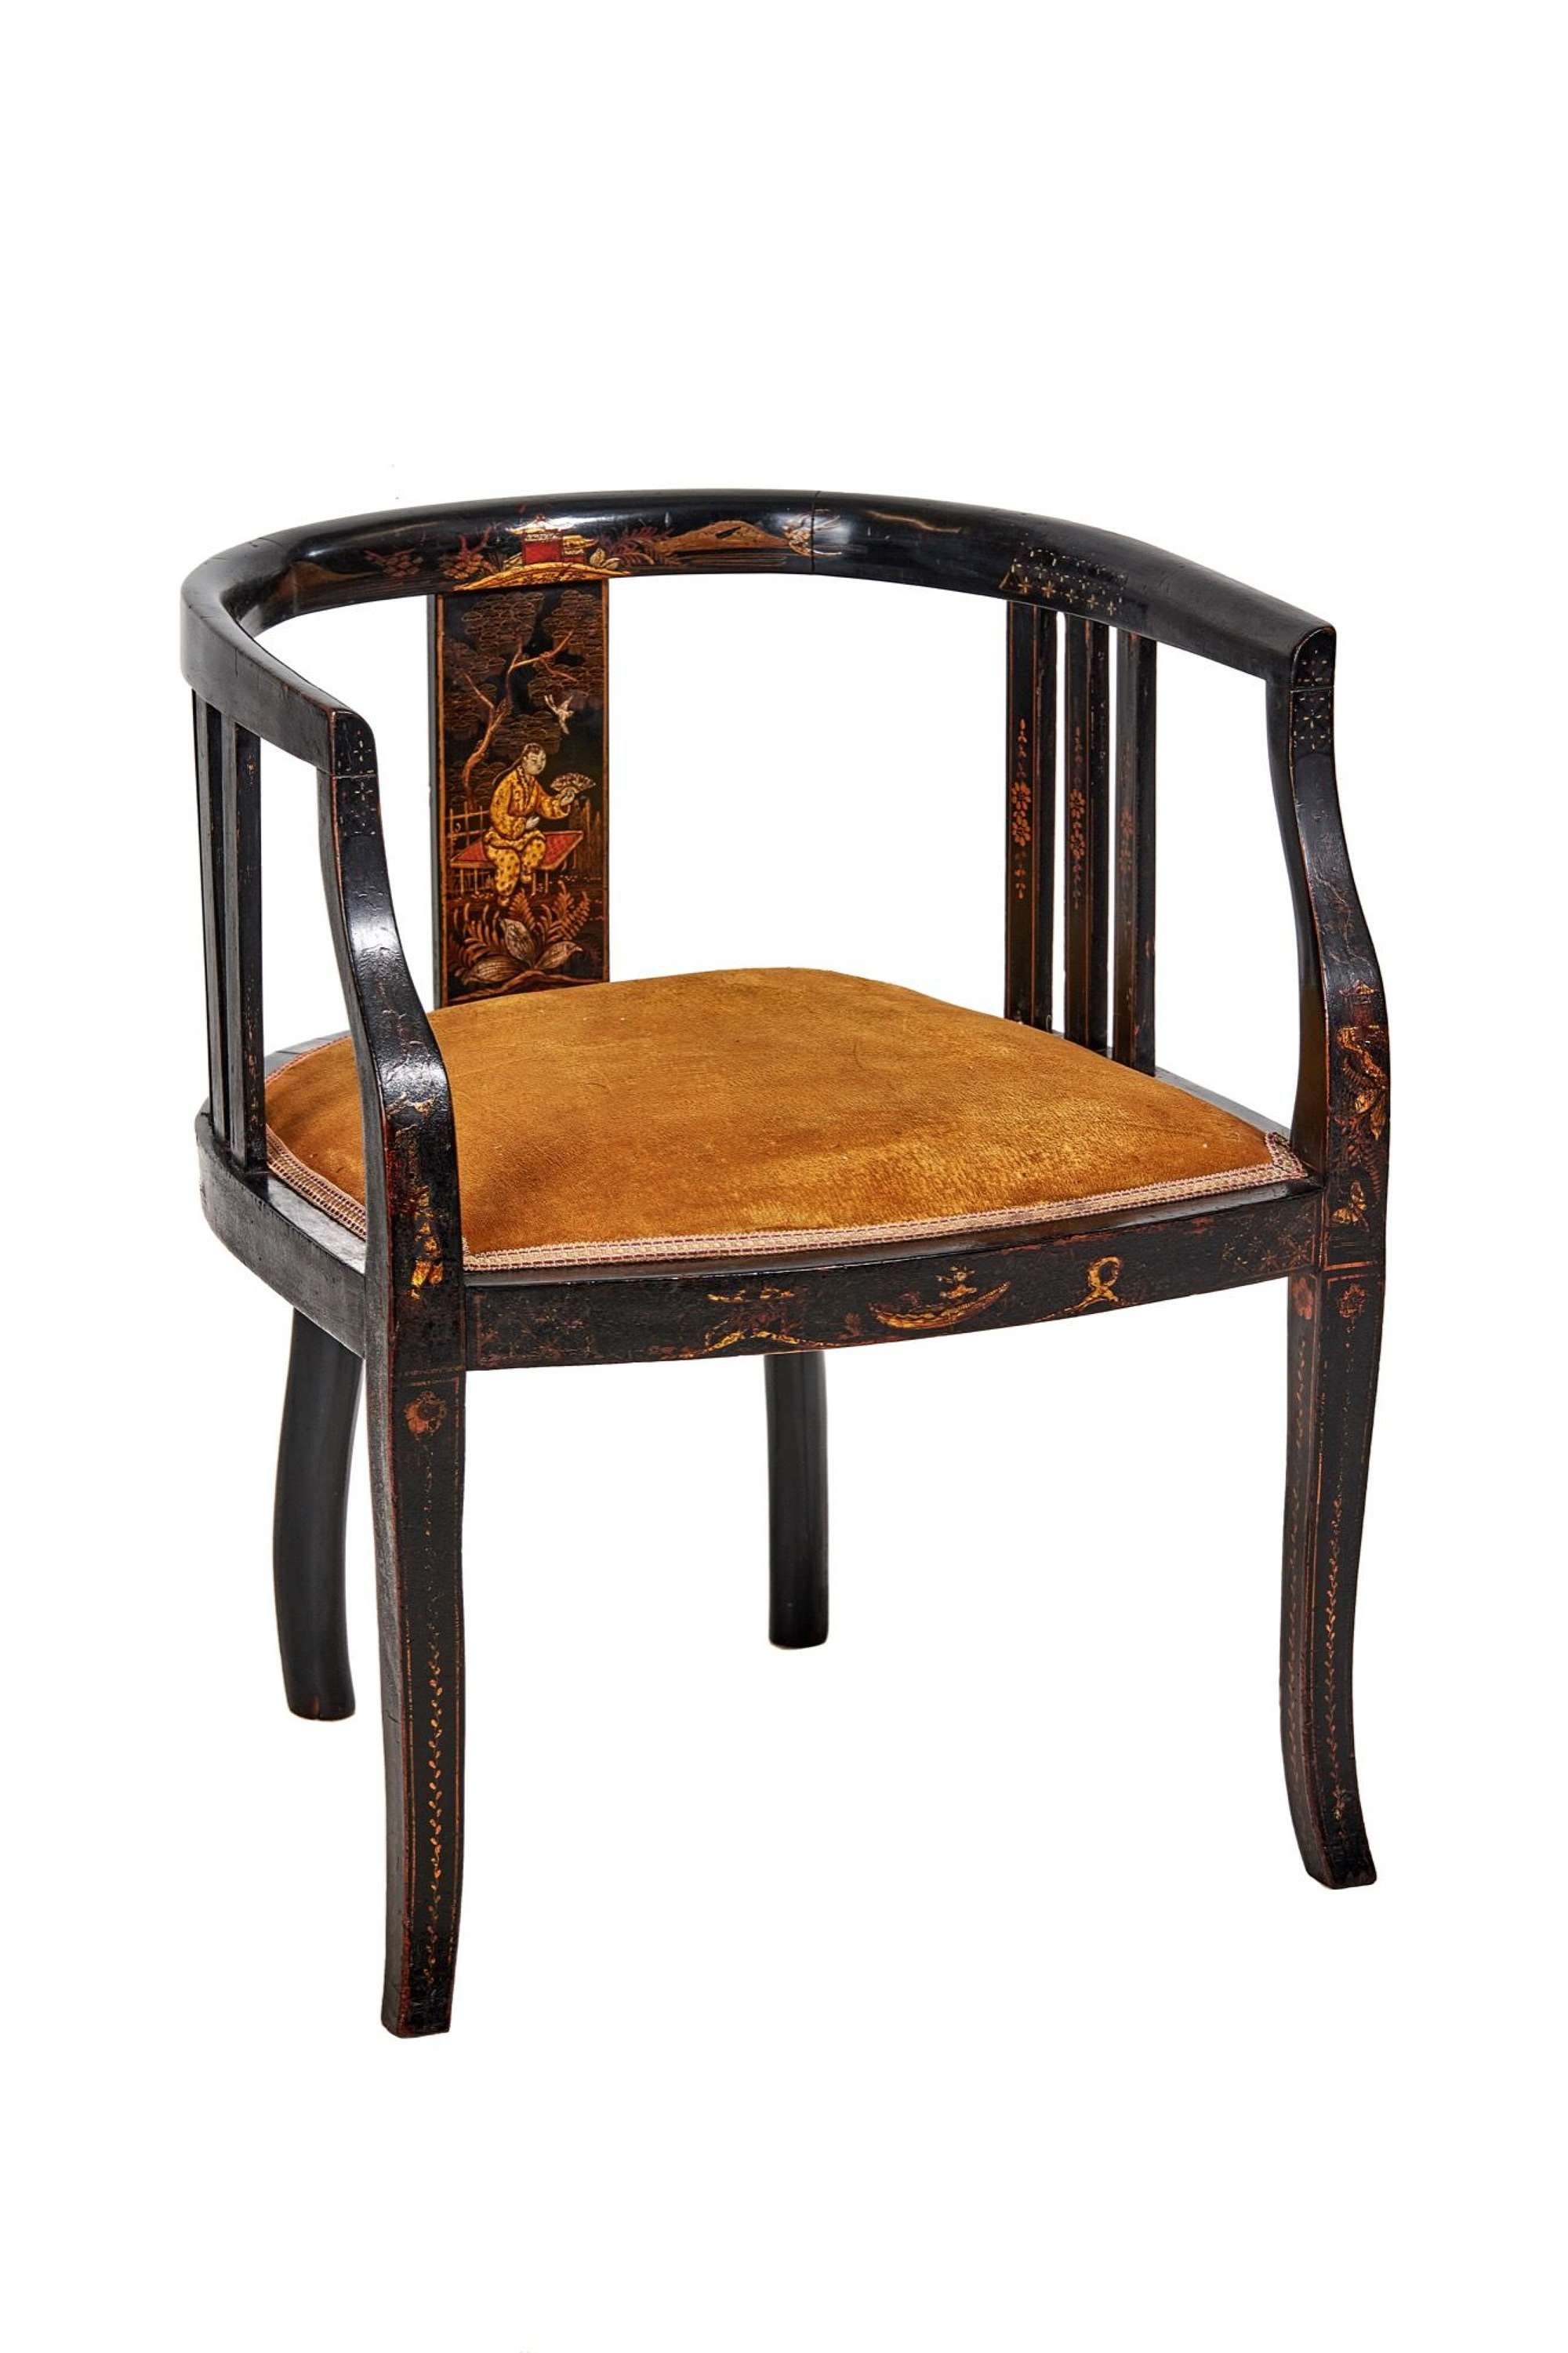 Chinoiserie Decorated Bowback desk chair circa 1930s